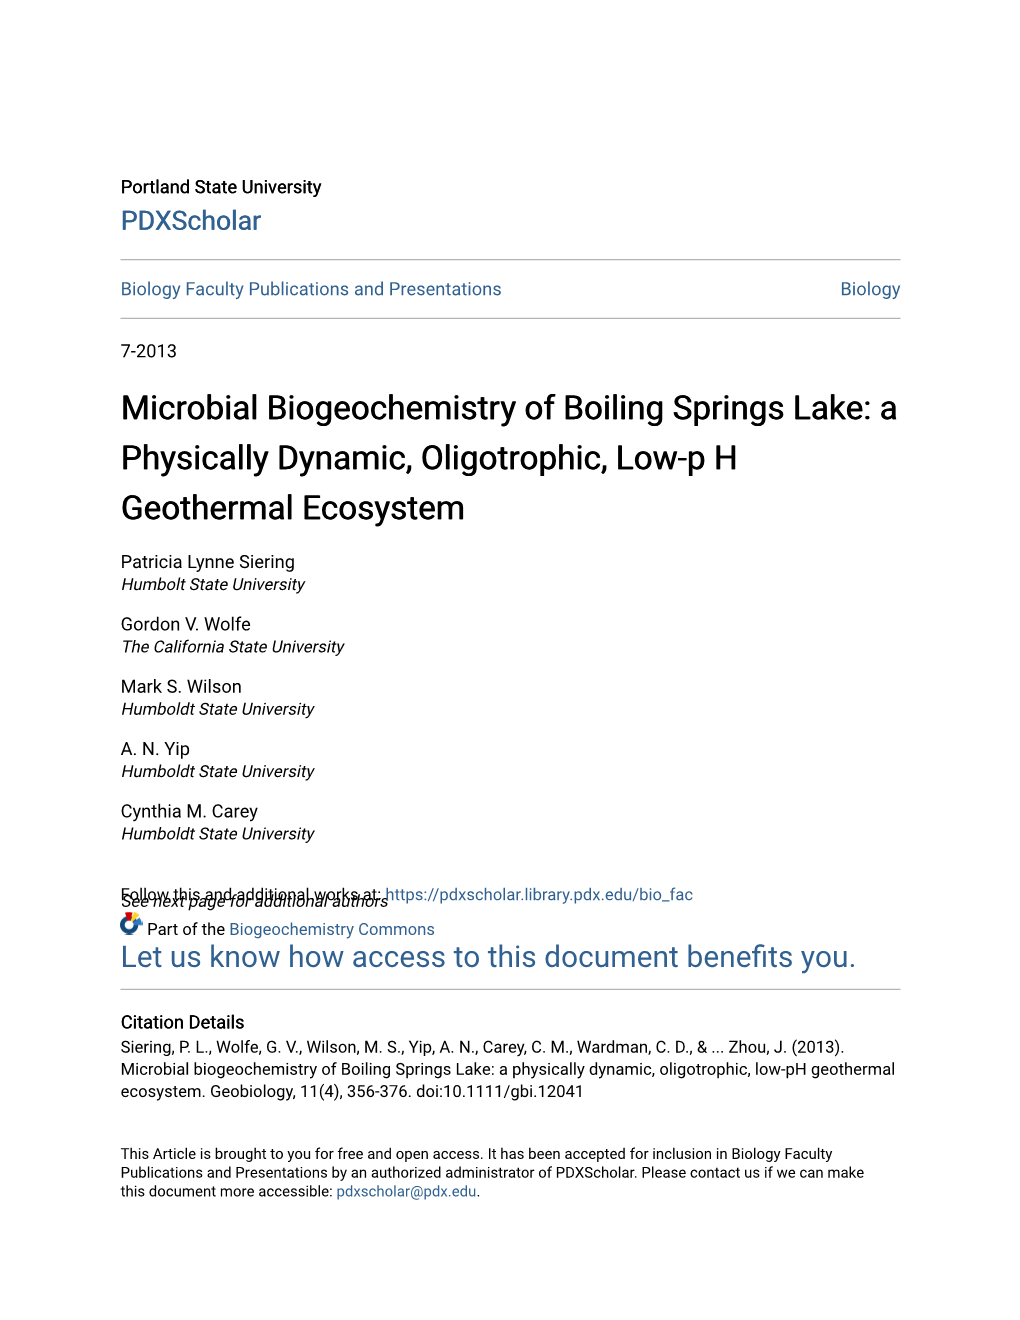 Microbial Biogeochemistry of Boiling Springs Lake: a Physically Dynamic, Oligotrophic, Low-P H Geothermal Ecosystem